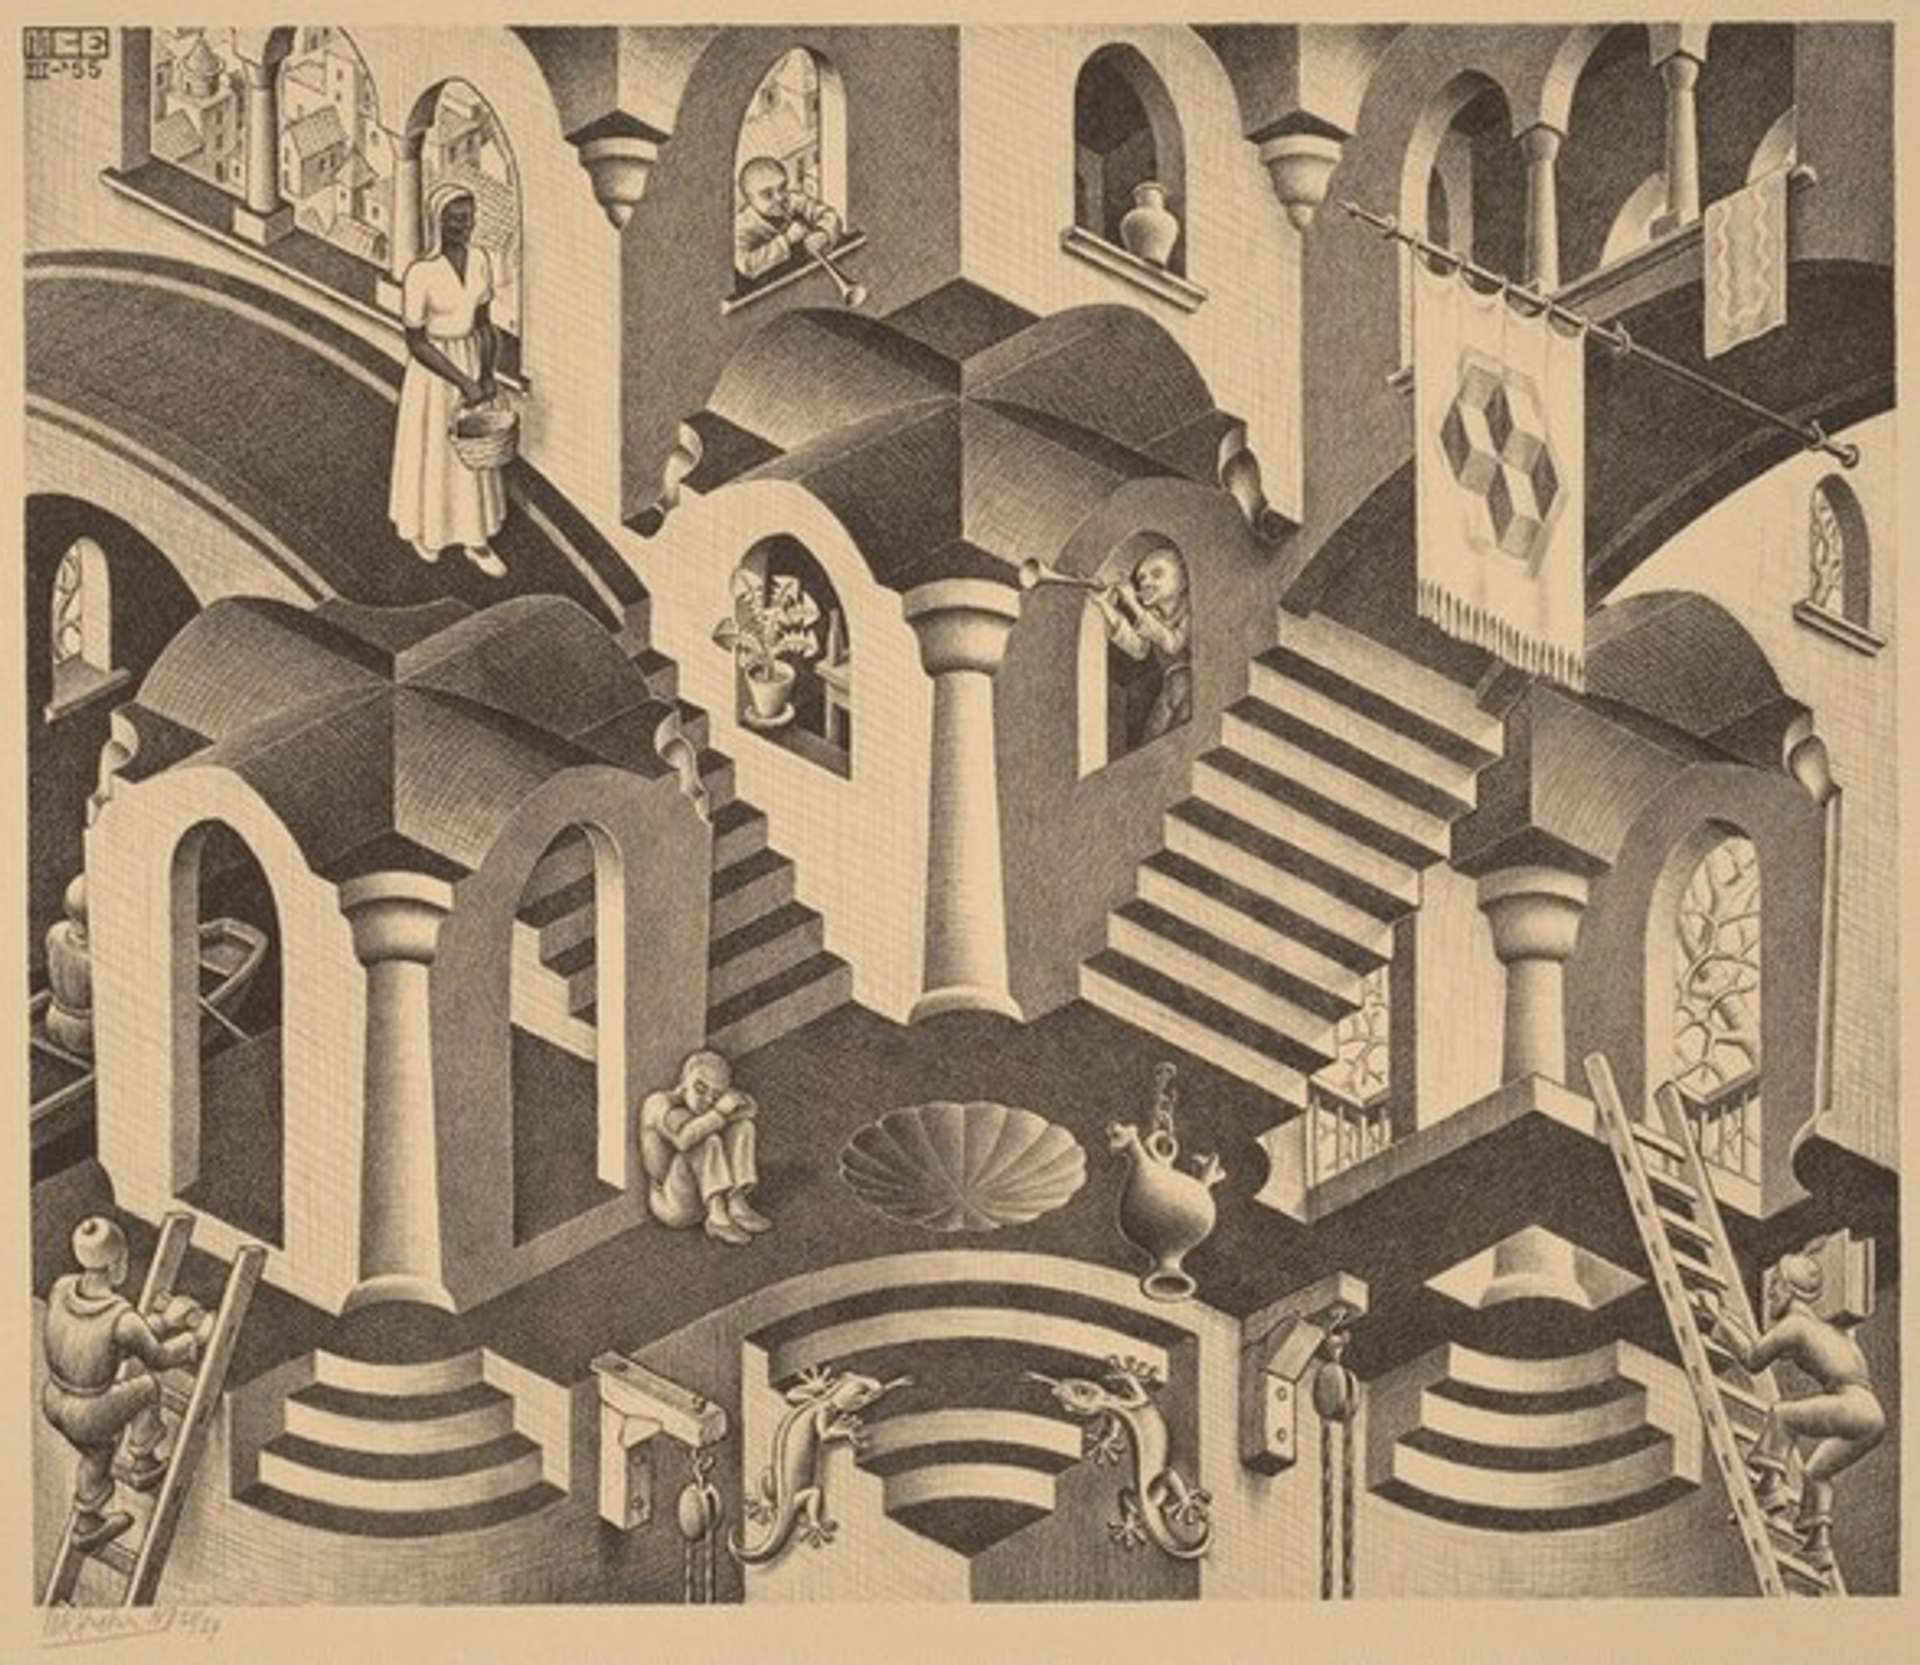 A lithograph print titled "Convex and Concave" by M.C. Escher. The artwork features interlocking shapes with a combination of convex and concave surfaces arranged in a repeating pattern, creating an optical illusion of depth and movement.